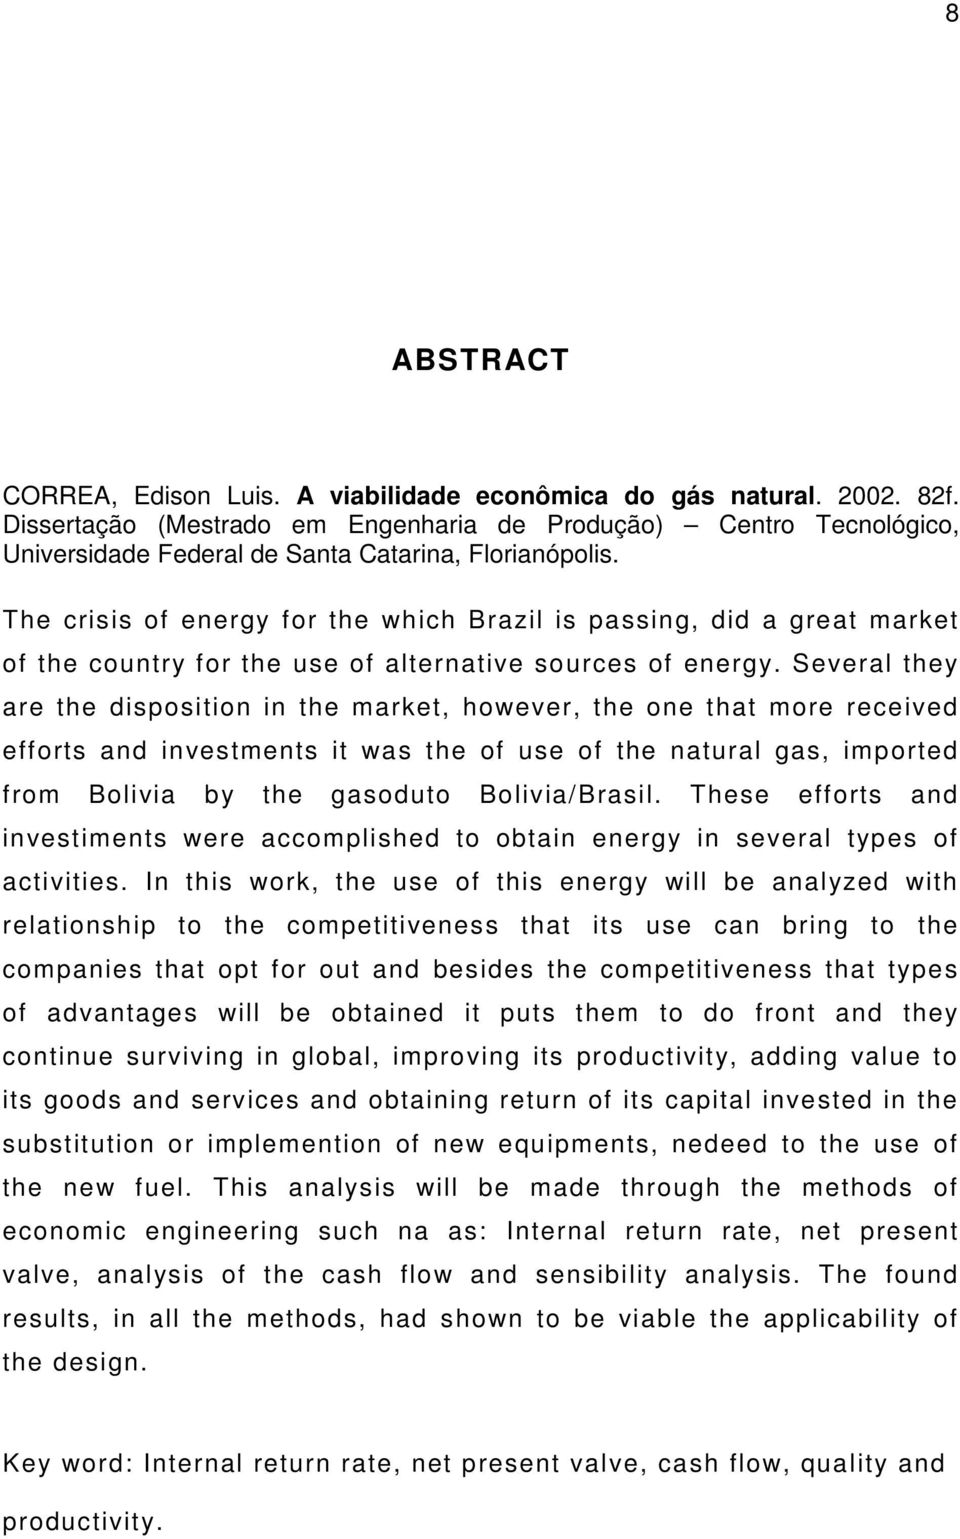 The crisis of energy for the which Brazil is passing, did a great market of the country for the use of alternative sources of energy.